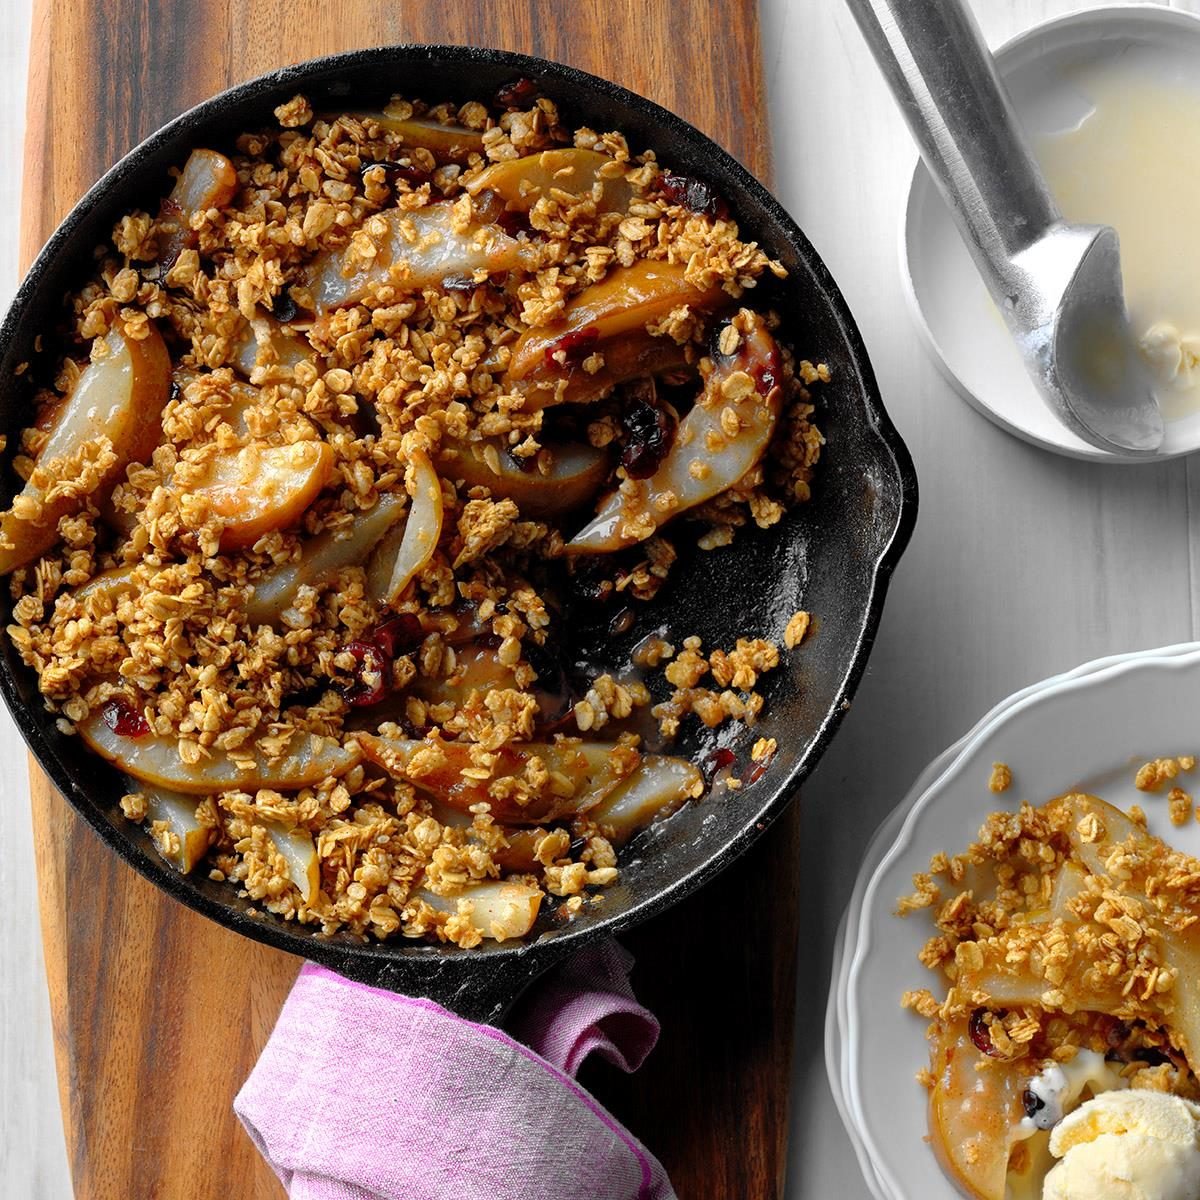 Grilled Cranberry Pear Crumble Recipe: How to Make It